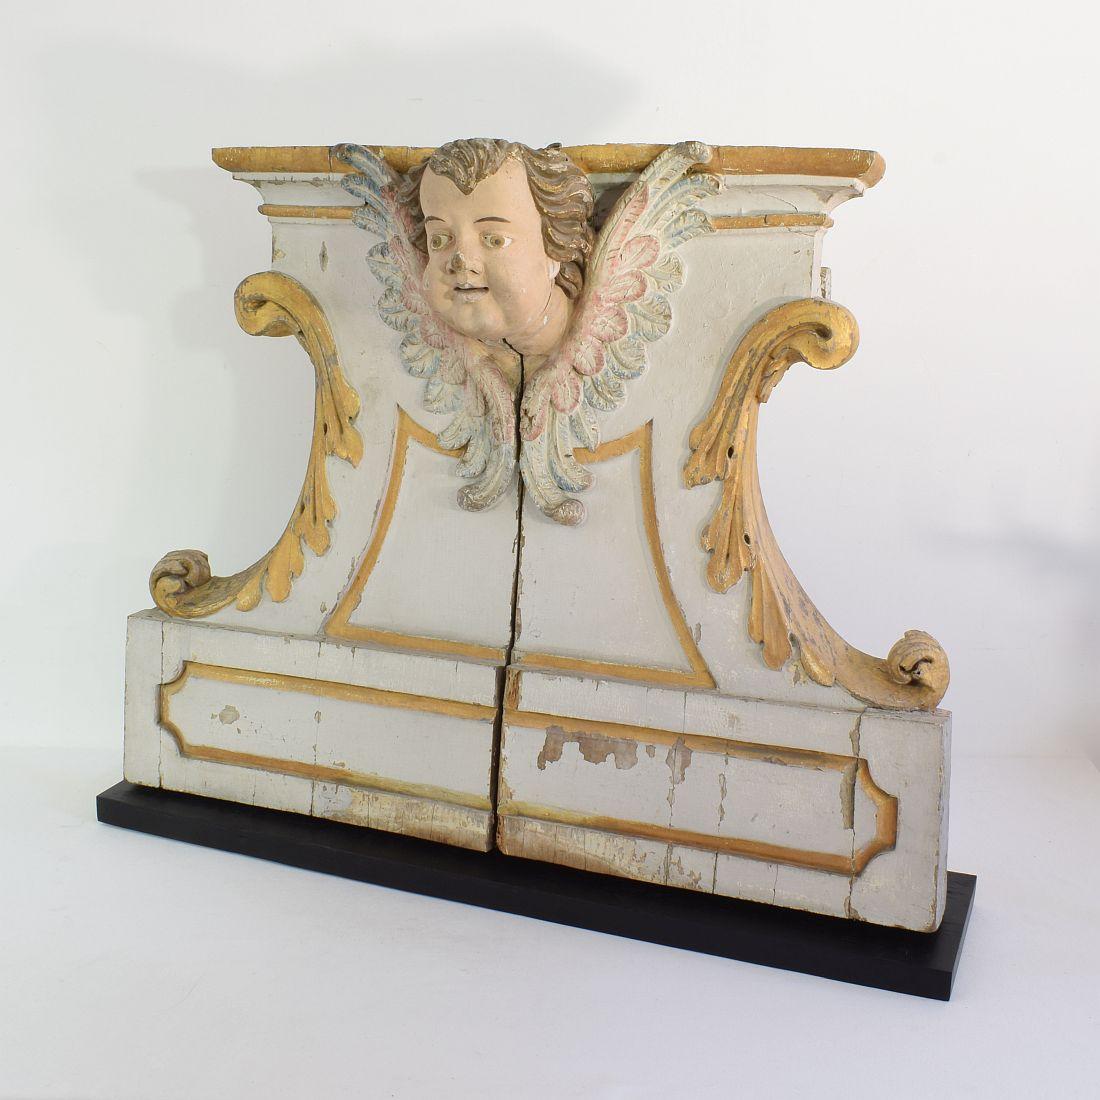 Wonderful baroque altar ornament with Angel head. Great and unique item.
Spain circa 1750
Weathered, losses and old repairs. 
More photo's available on request.
Measurements include the wooden base.